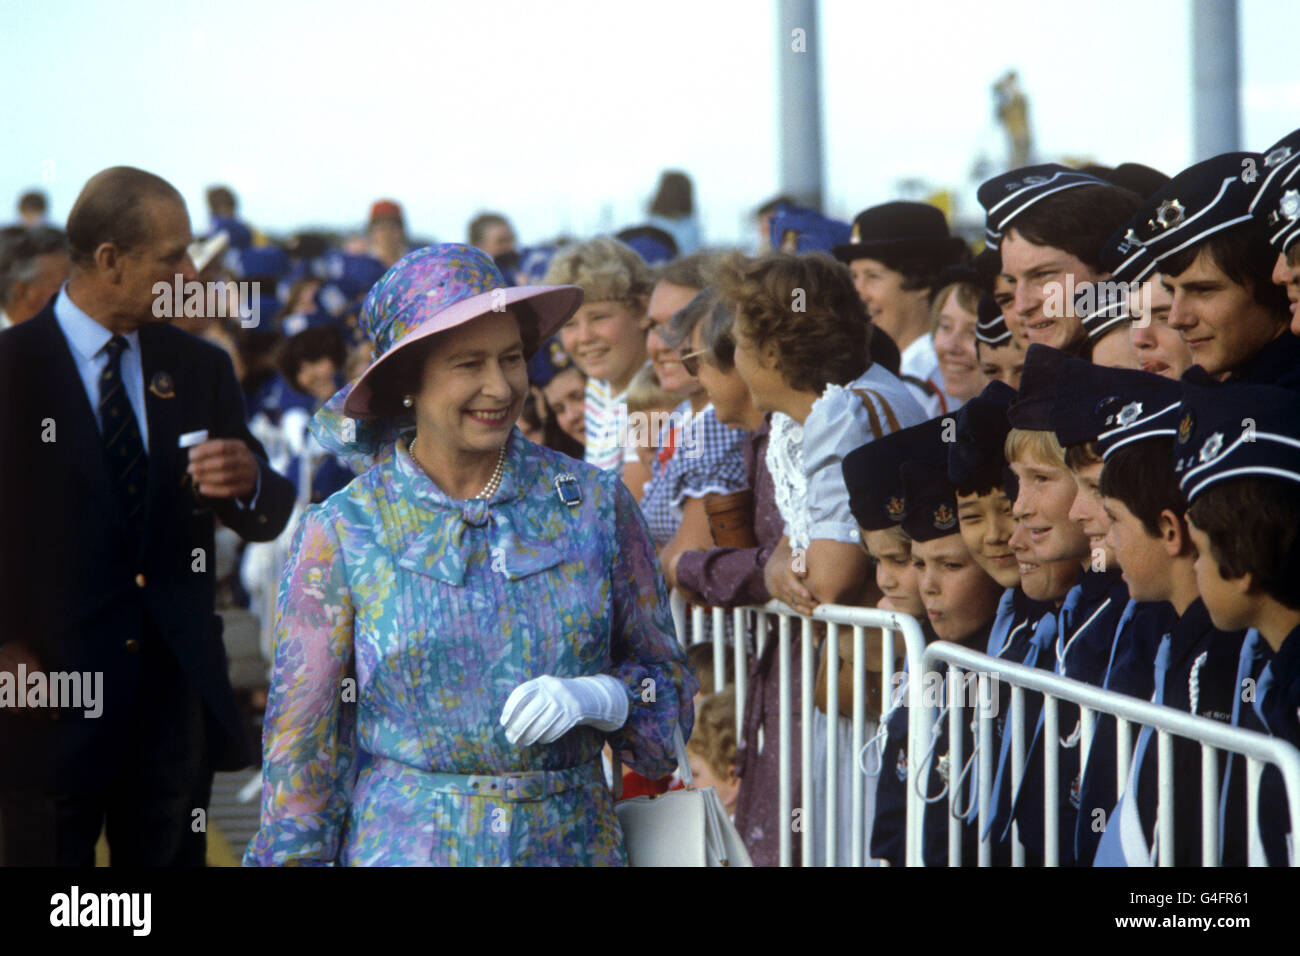 Queen Elizabeth II stops to greet young people as she arrives at Brisbane's Chandler Sports Complex to watch swimming events during the Commonwealth Games. Stock Photo